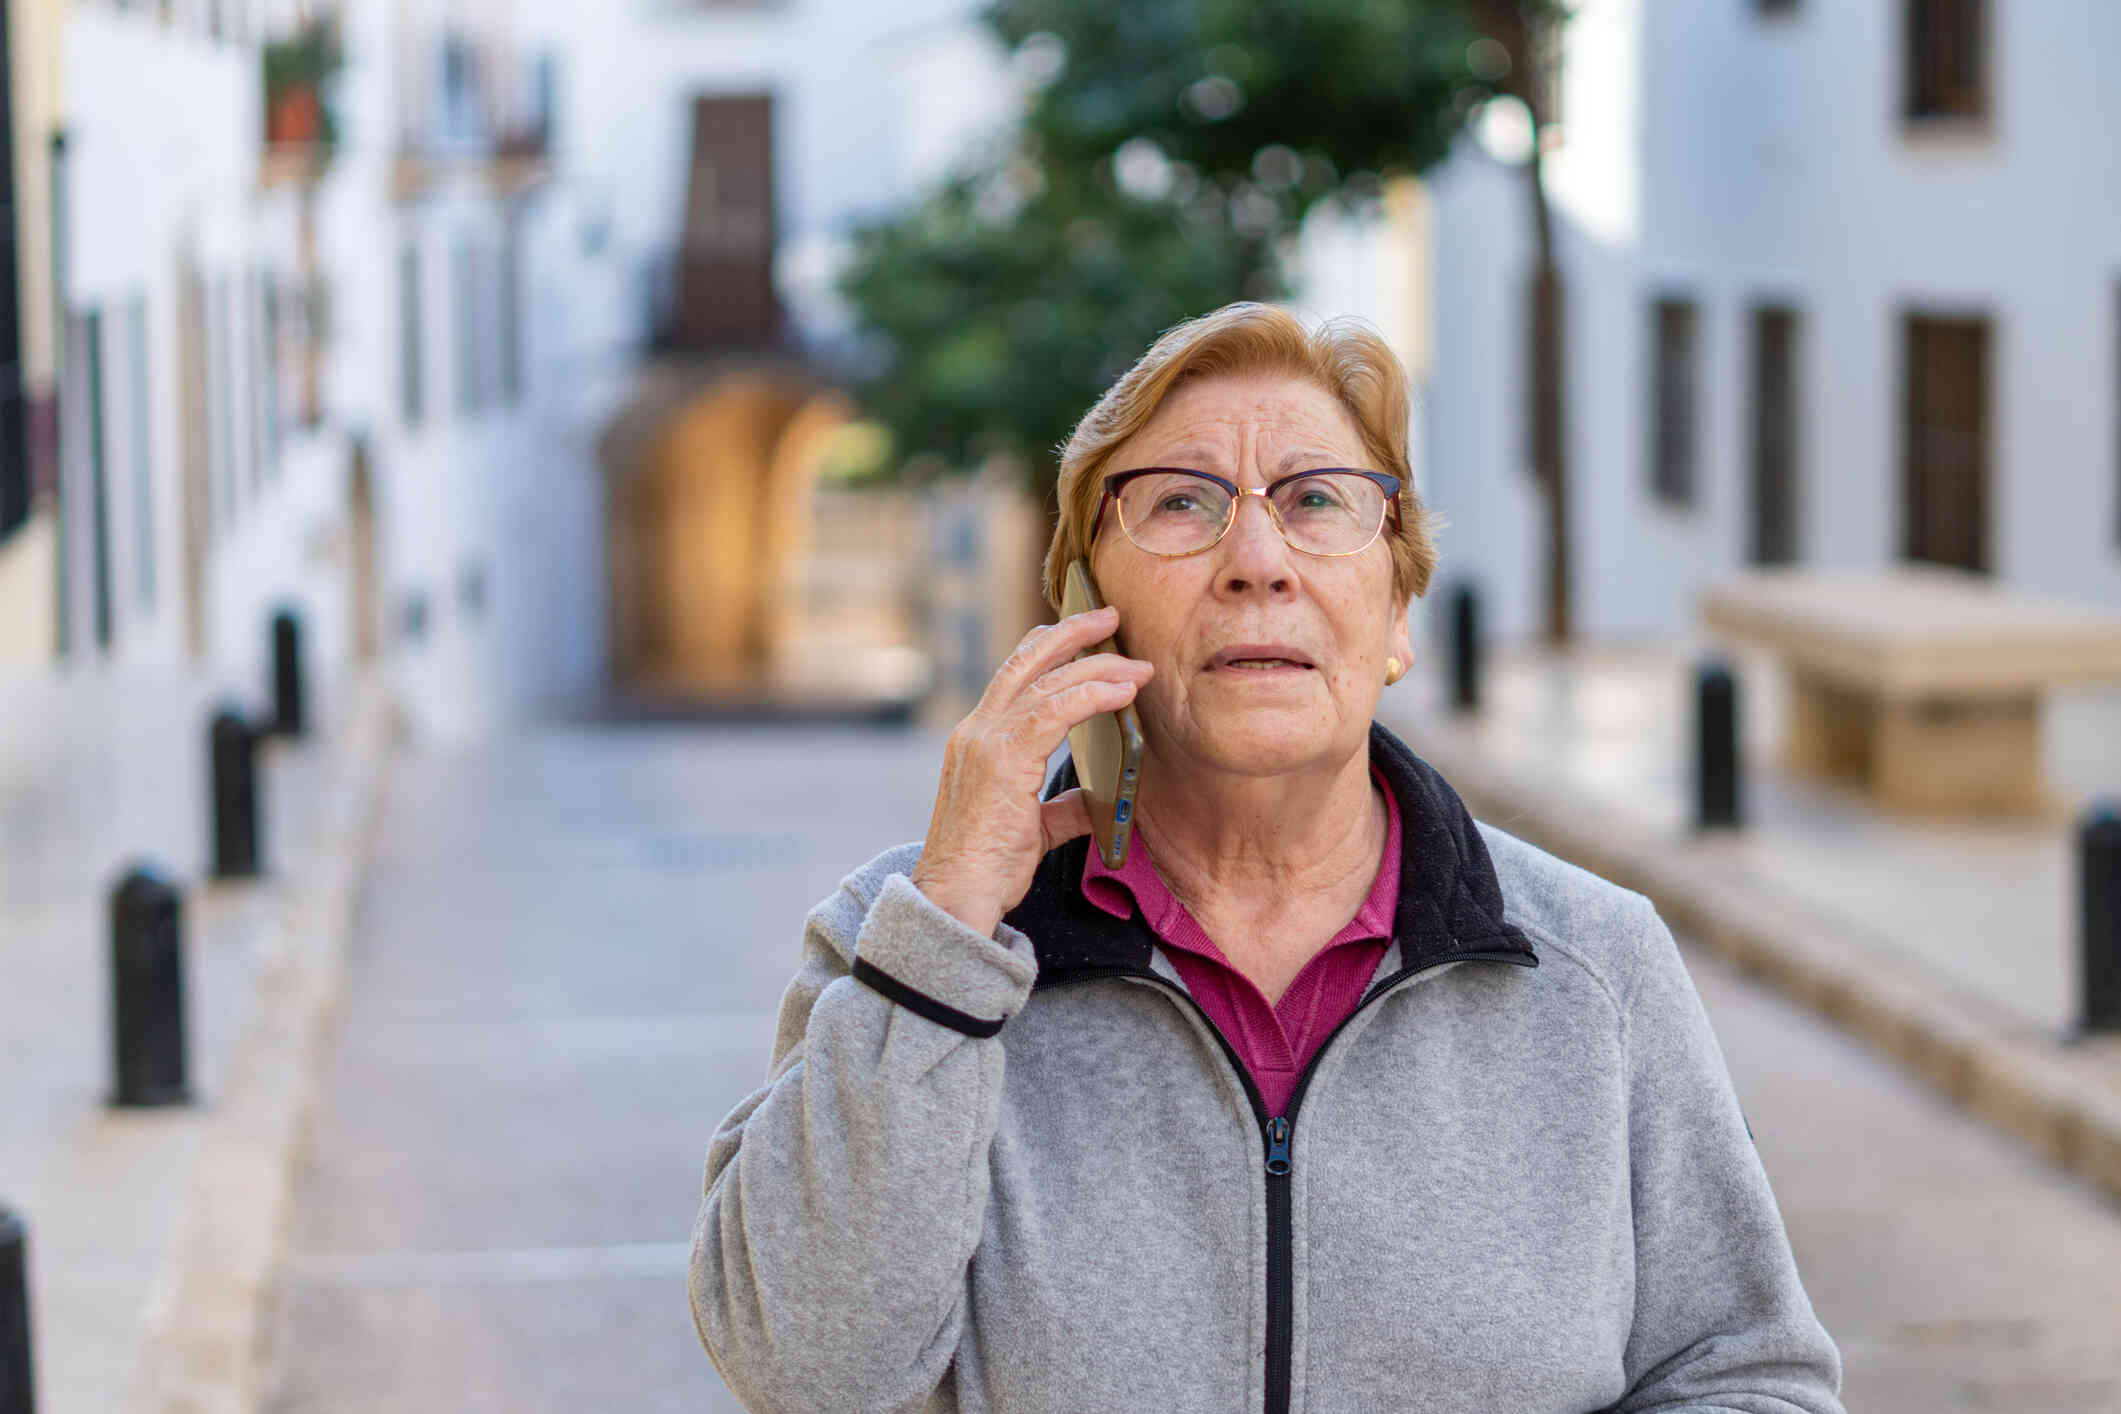 A mature woman talks on a cellphone with a serious expression while walking outside on a sunny day. 